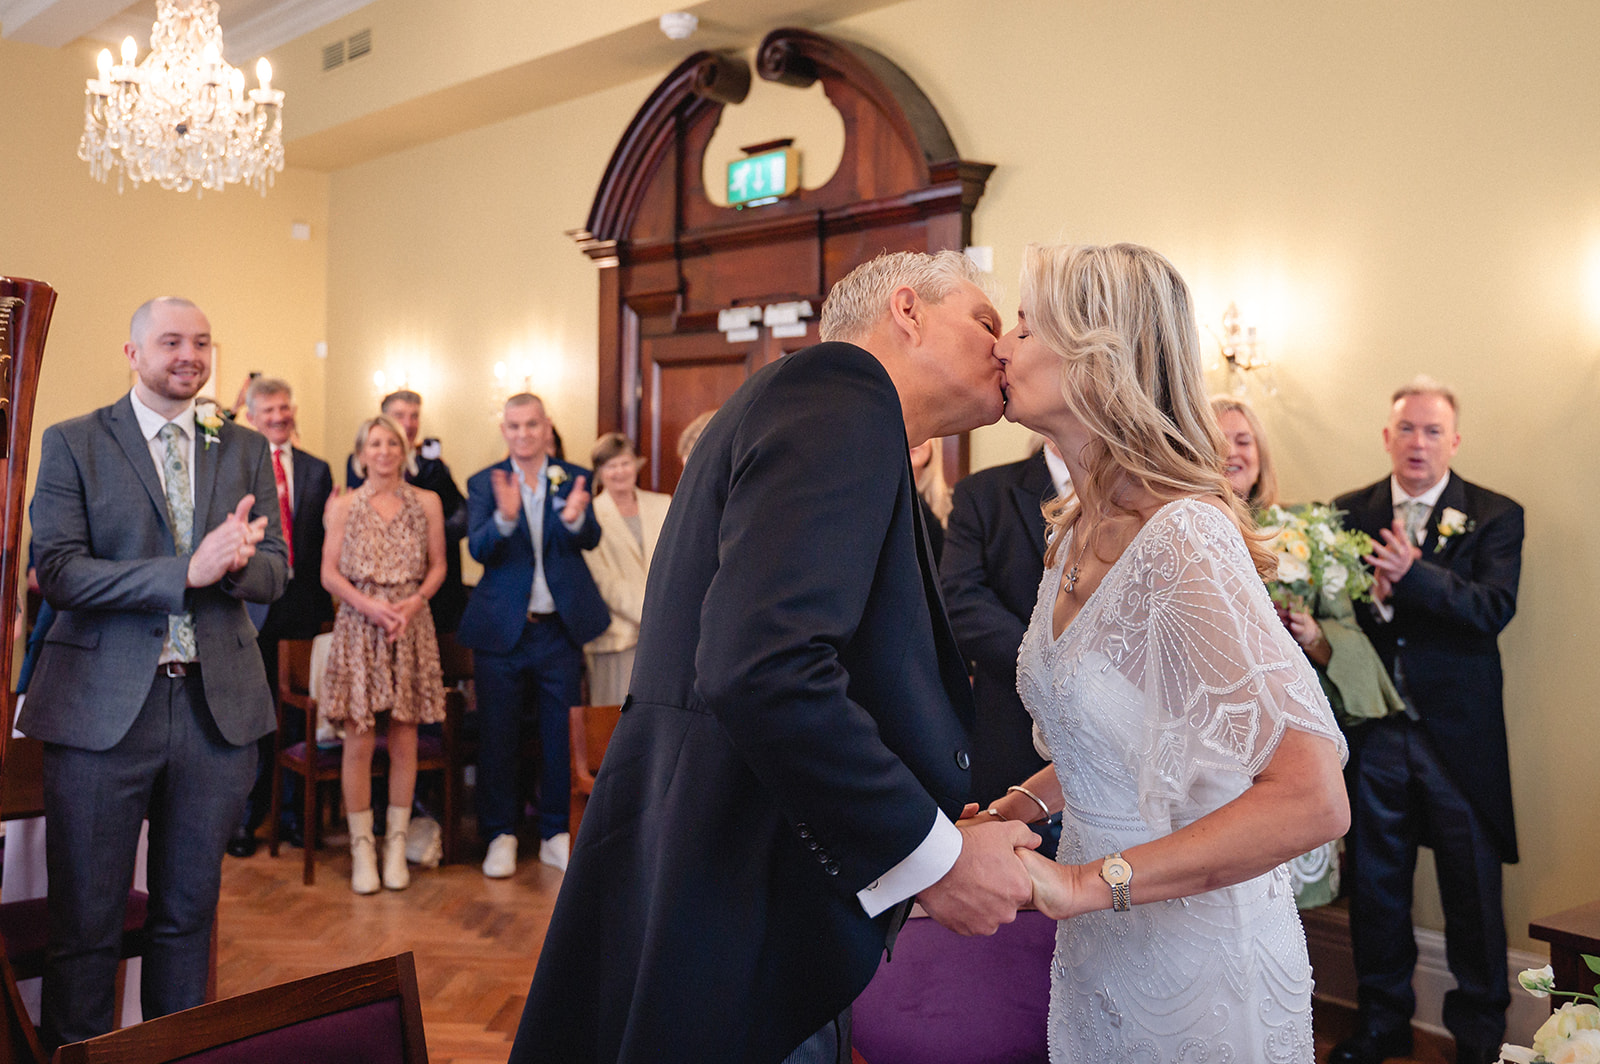 Lindsay and David kissing during the wedding ceremony in the Brydon Room at Chelsea Town Hall